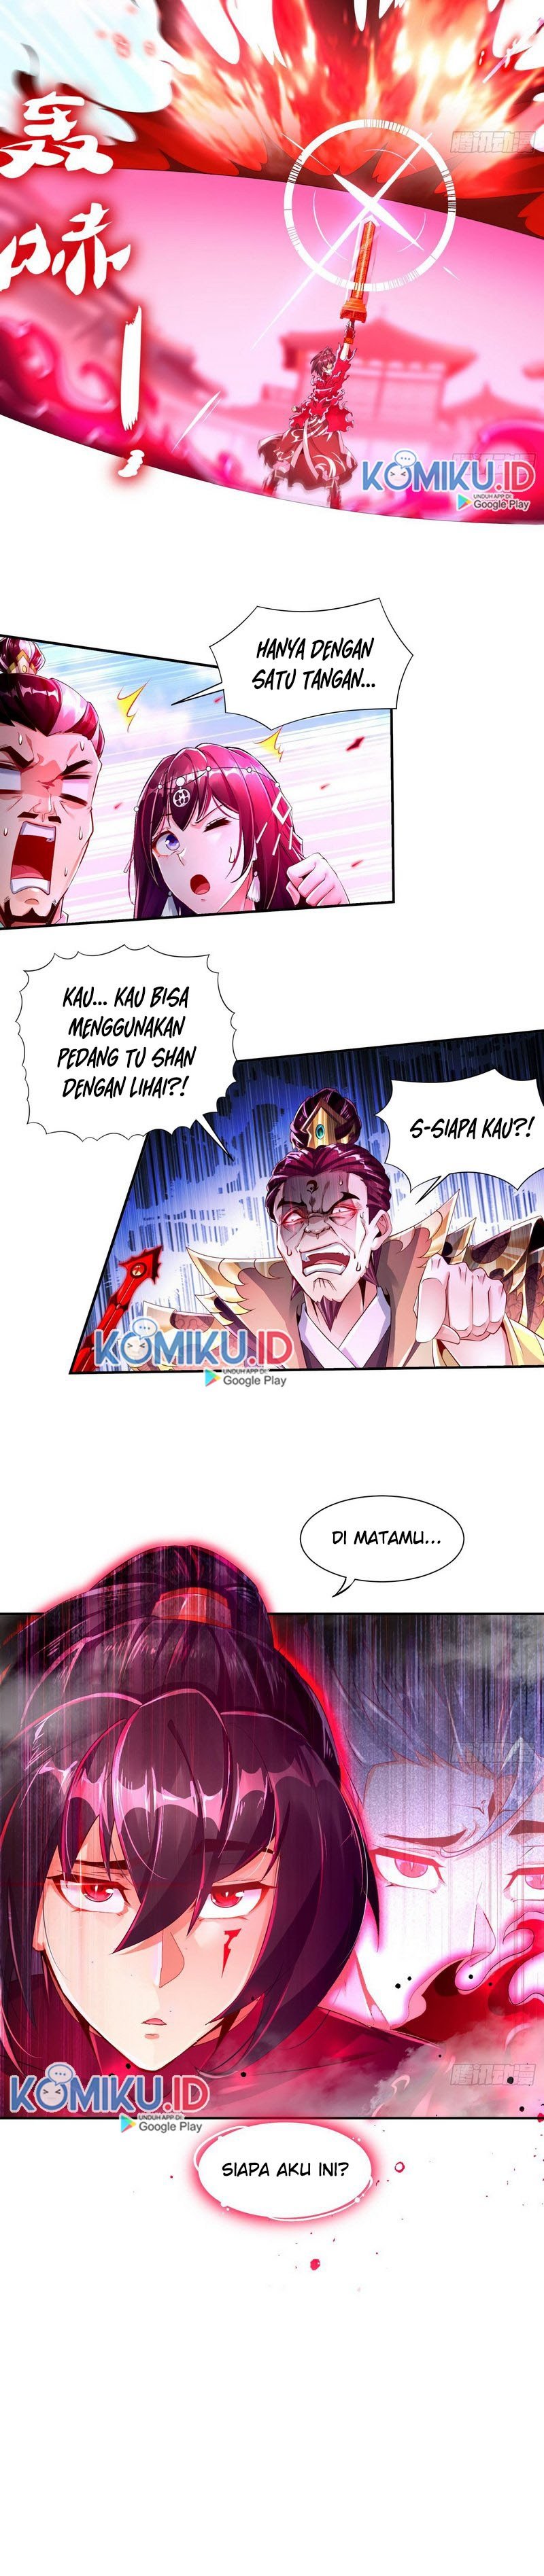 Rebirth of the Demon Reign (The Rebirth of the Demon God) Chapter 70